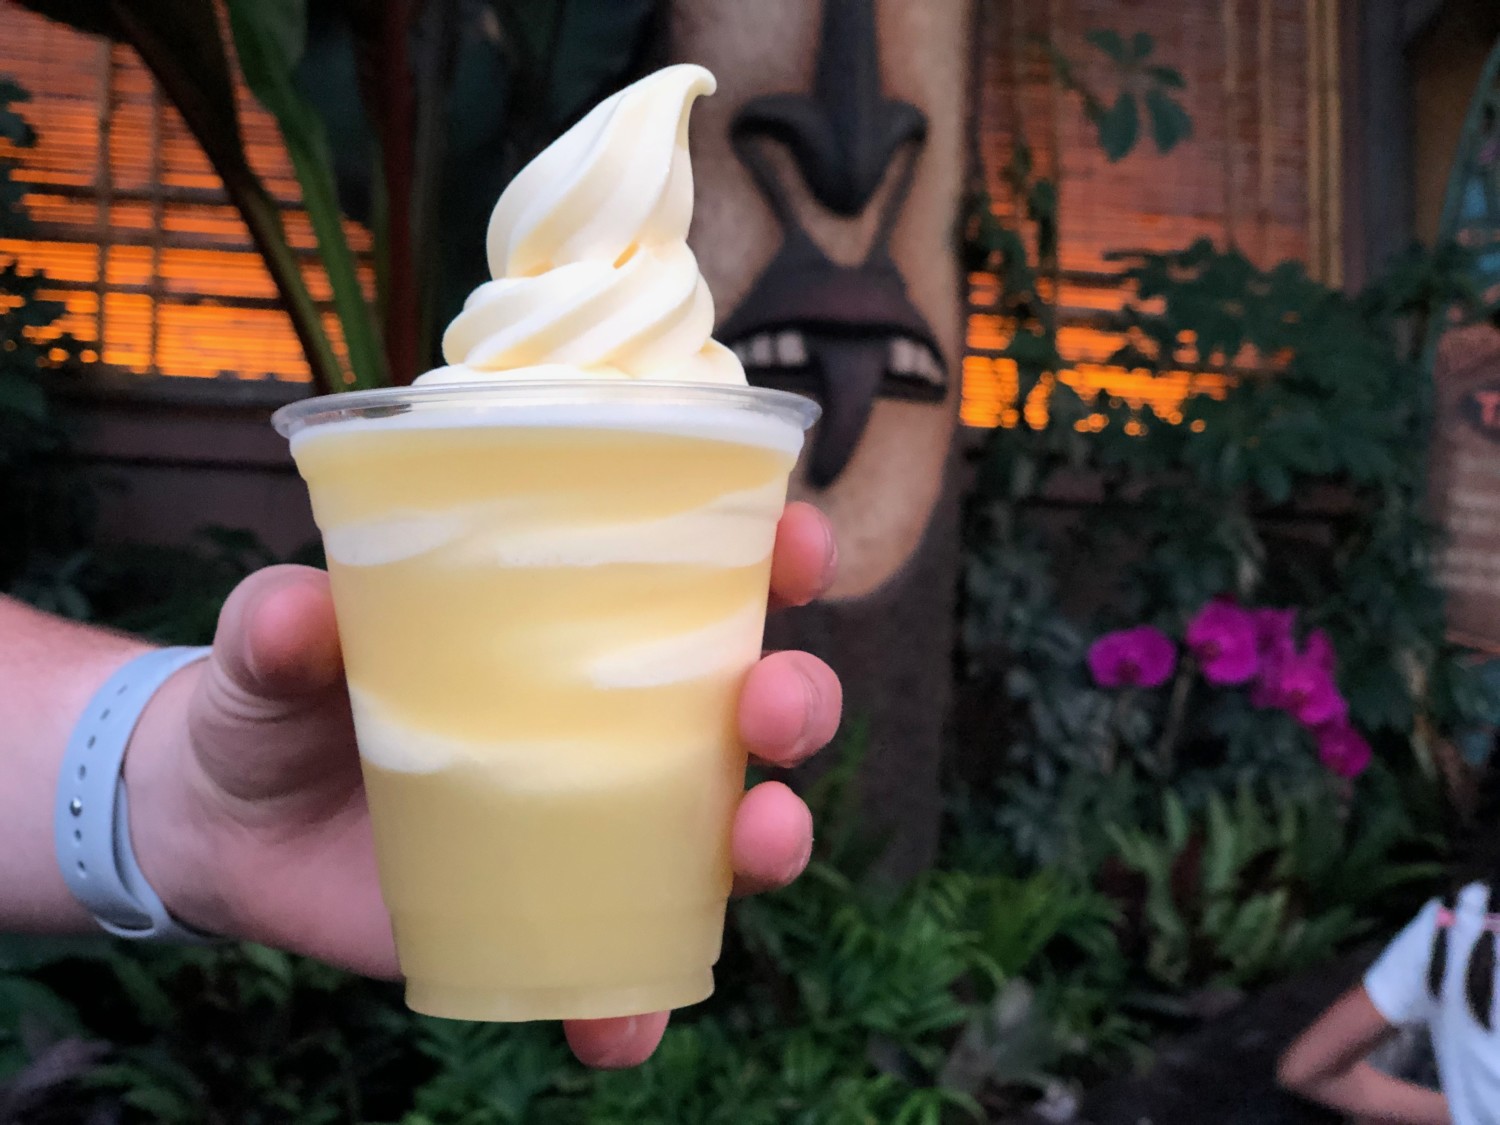 Hand holds Dole Whip in a cup